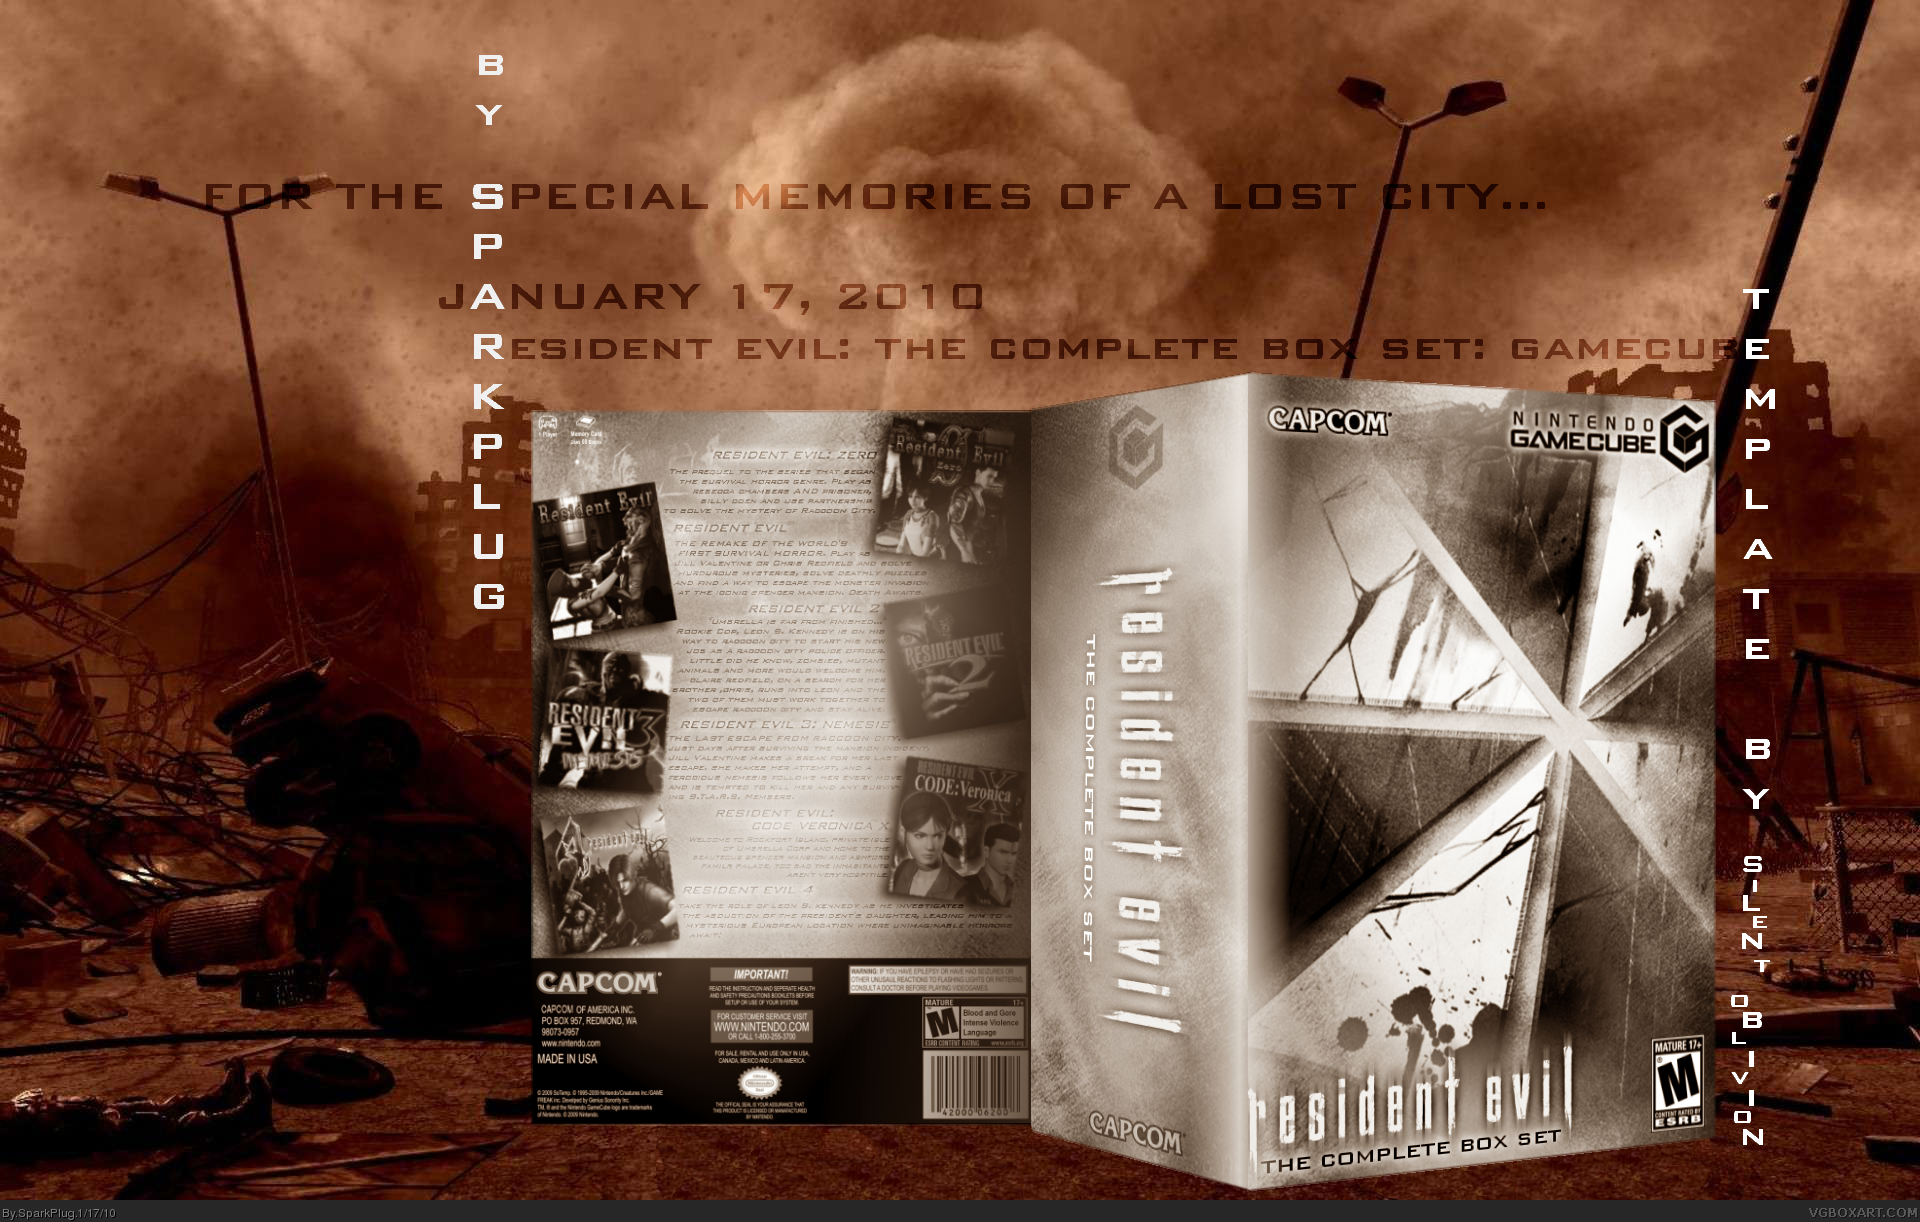 Resident Evil: The Complete Box Set box cover